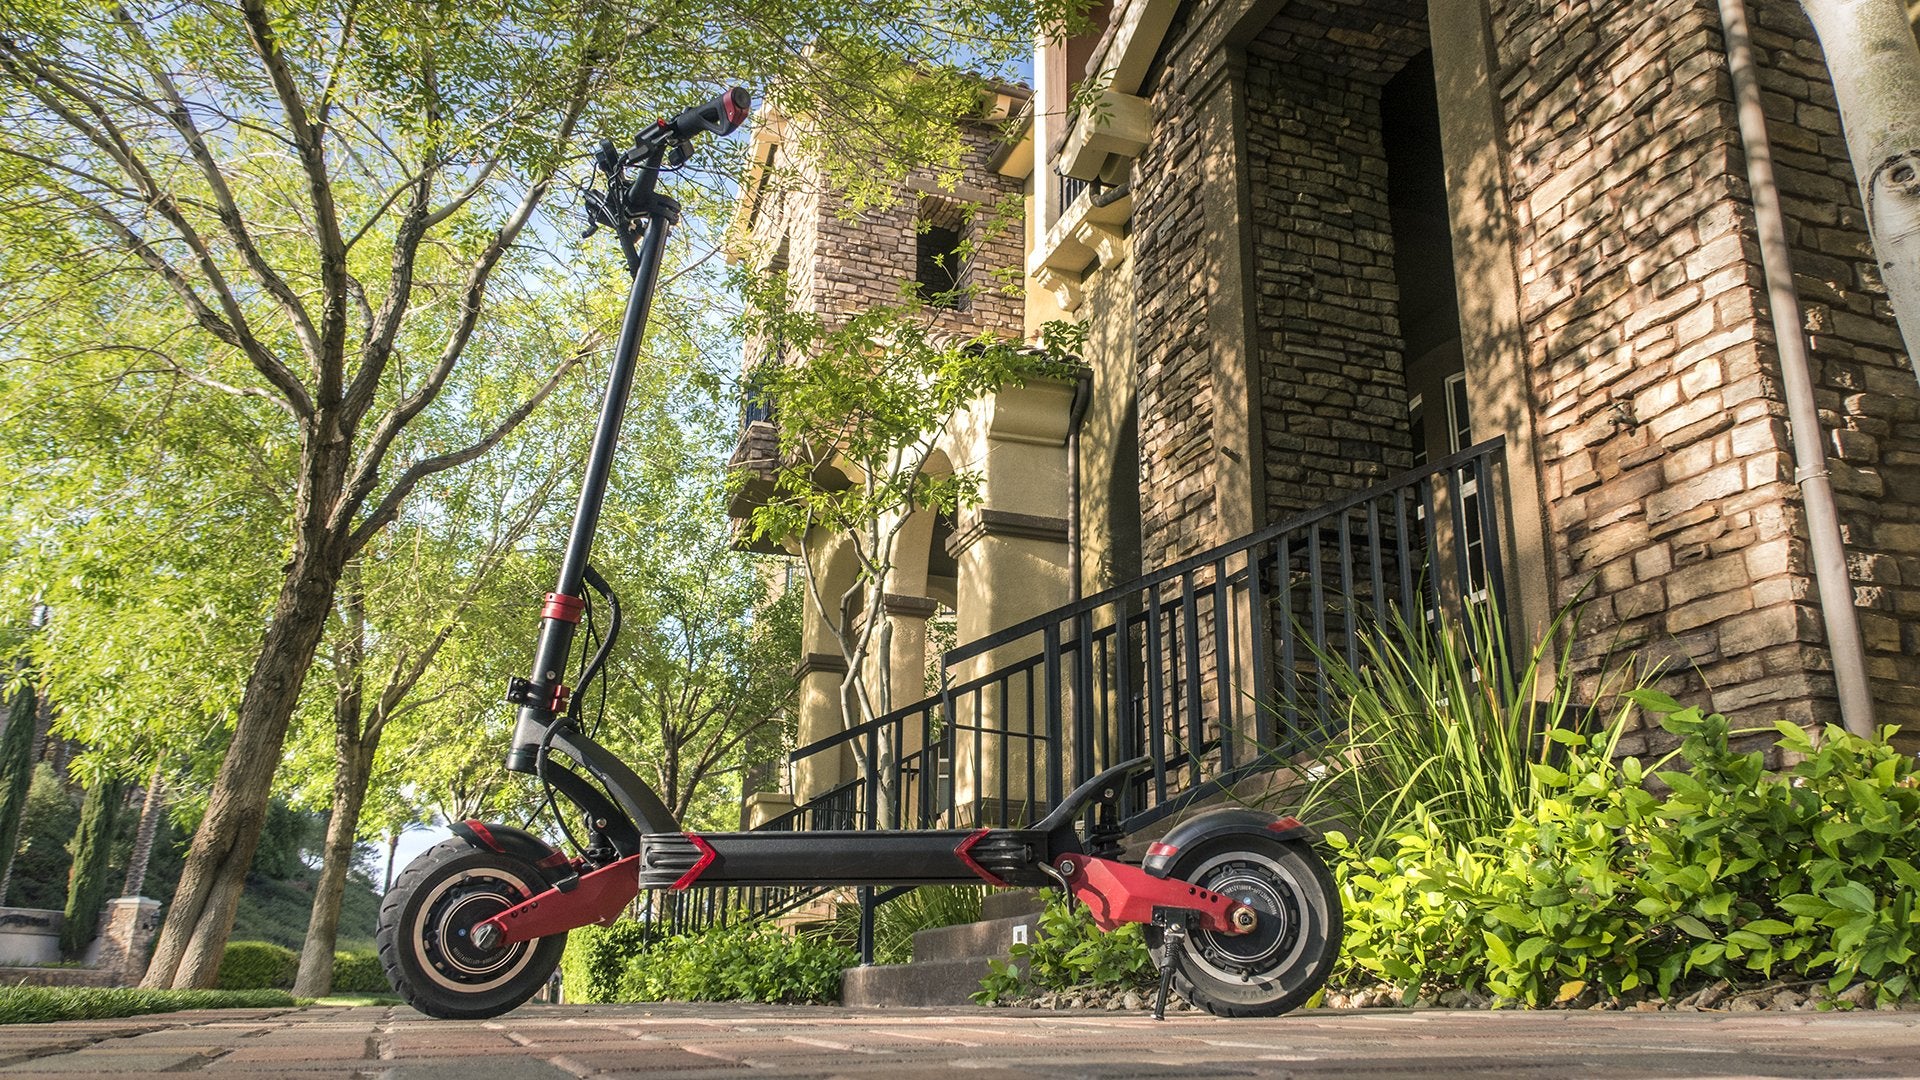 What Transportation Problems Does Electric Scooters Solve?